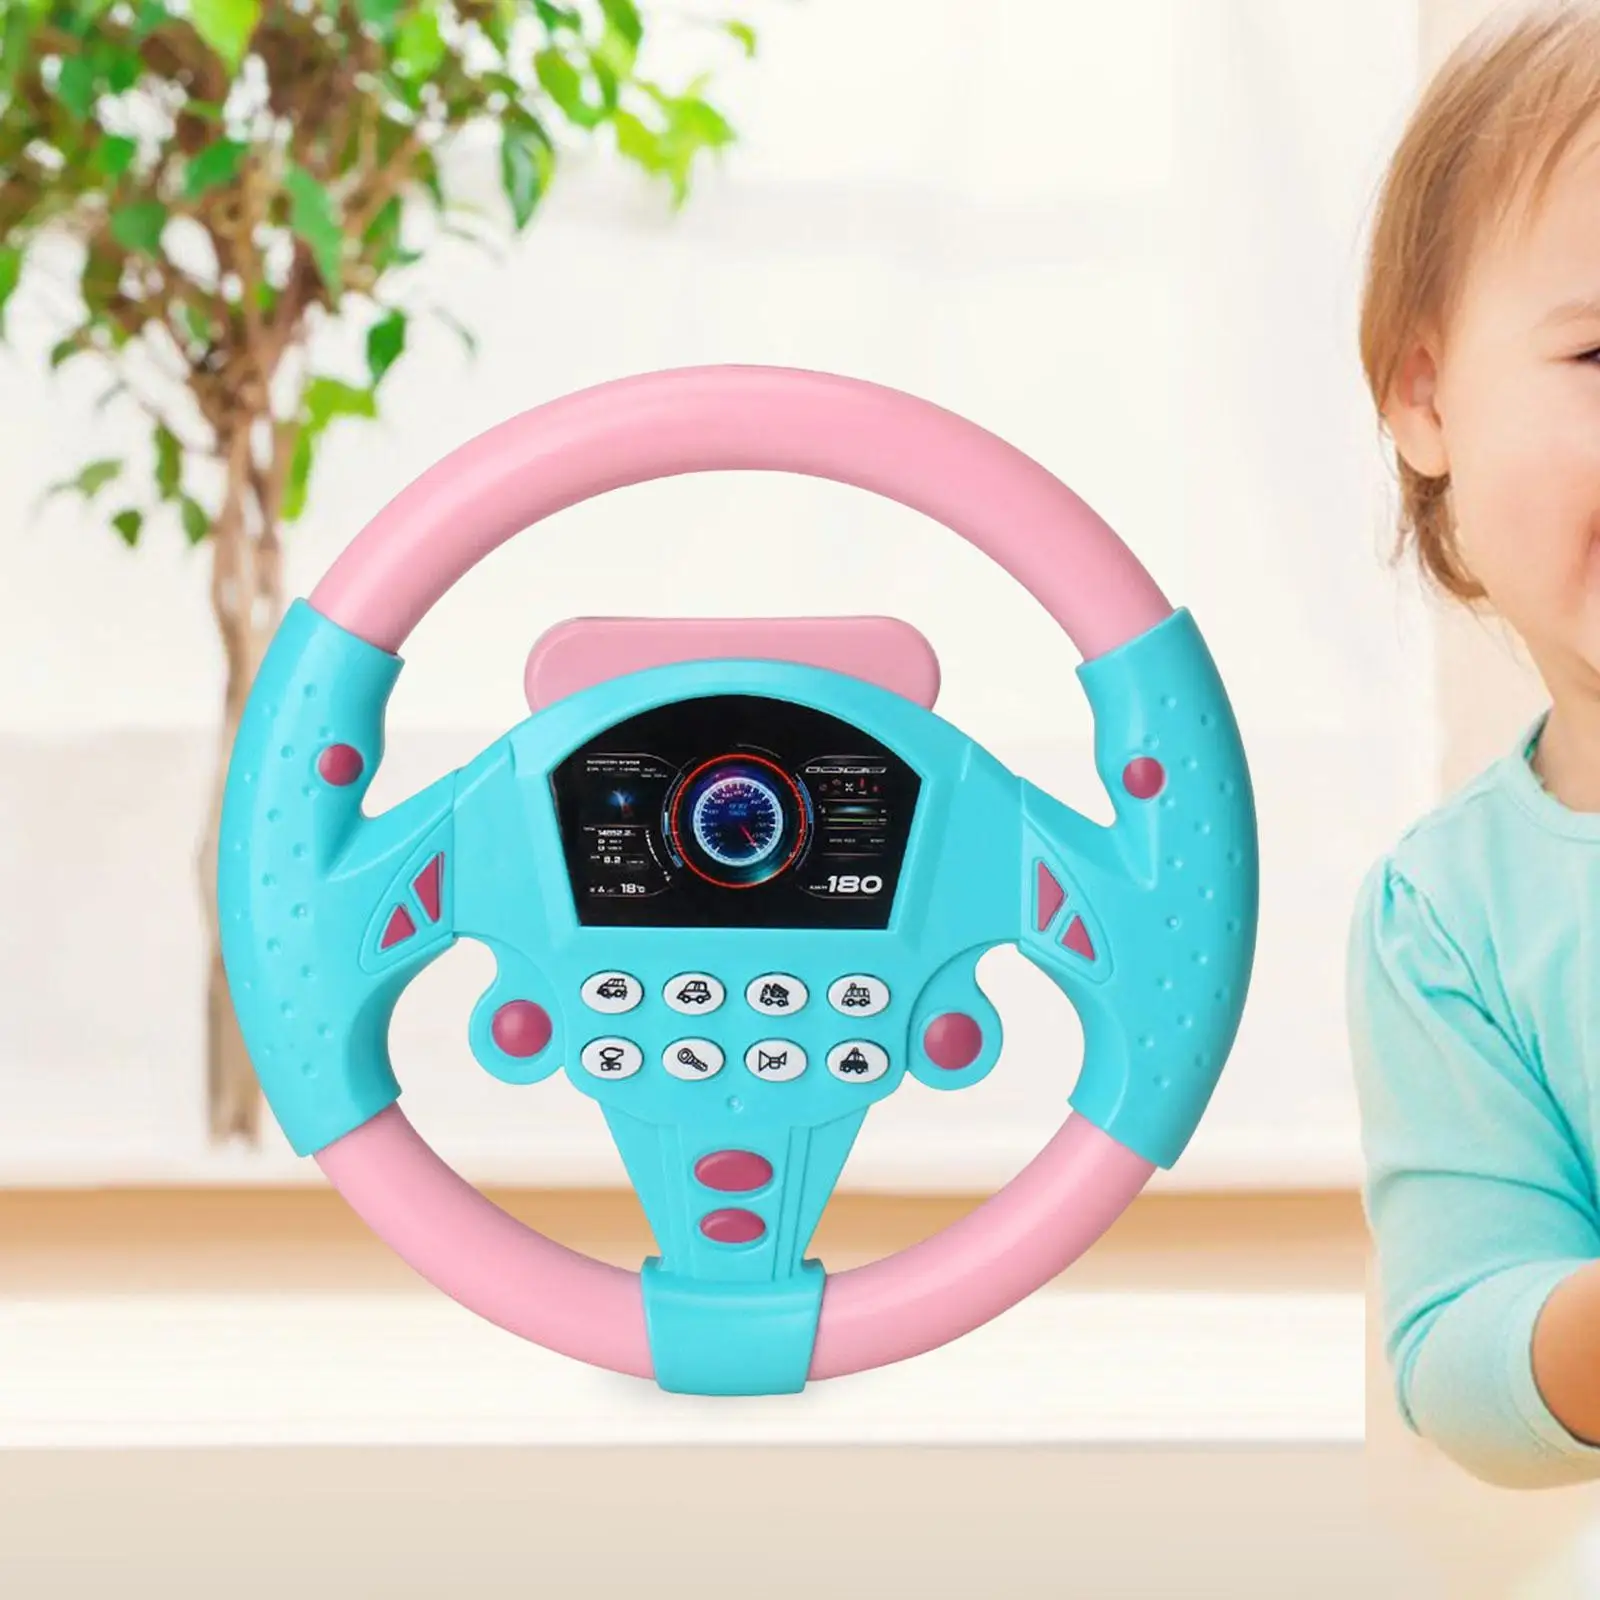 Simulation Driving Wheel Toy Educational Learning Toy for Boys Children Kids Toddlers